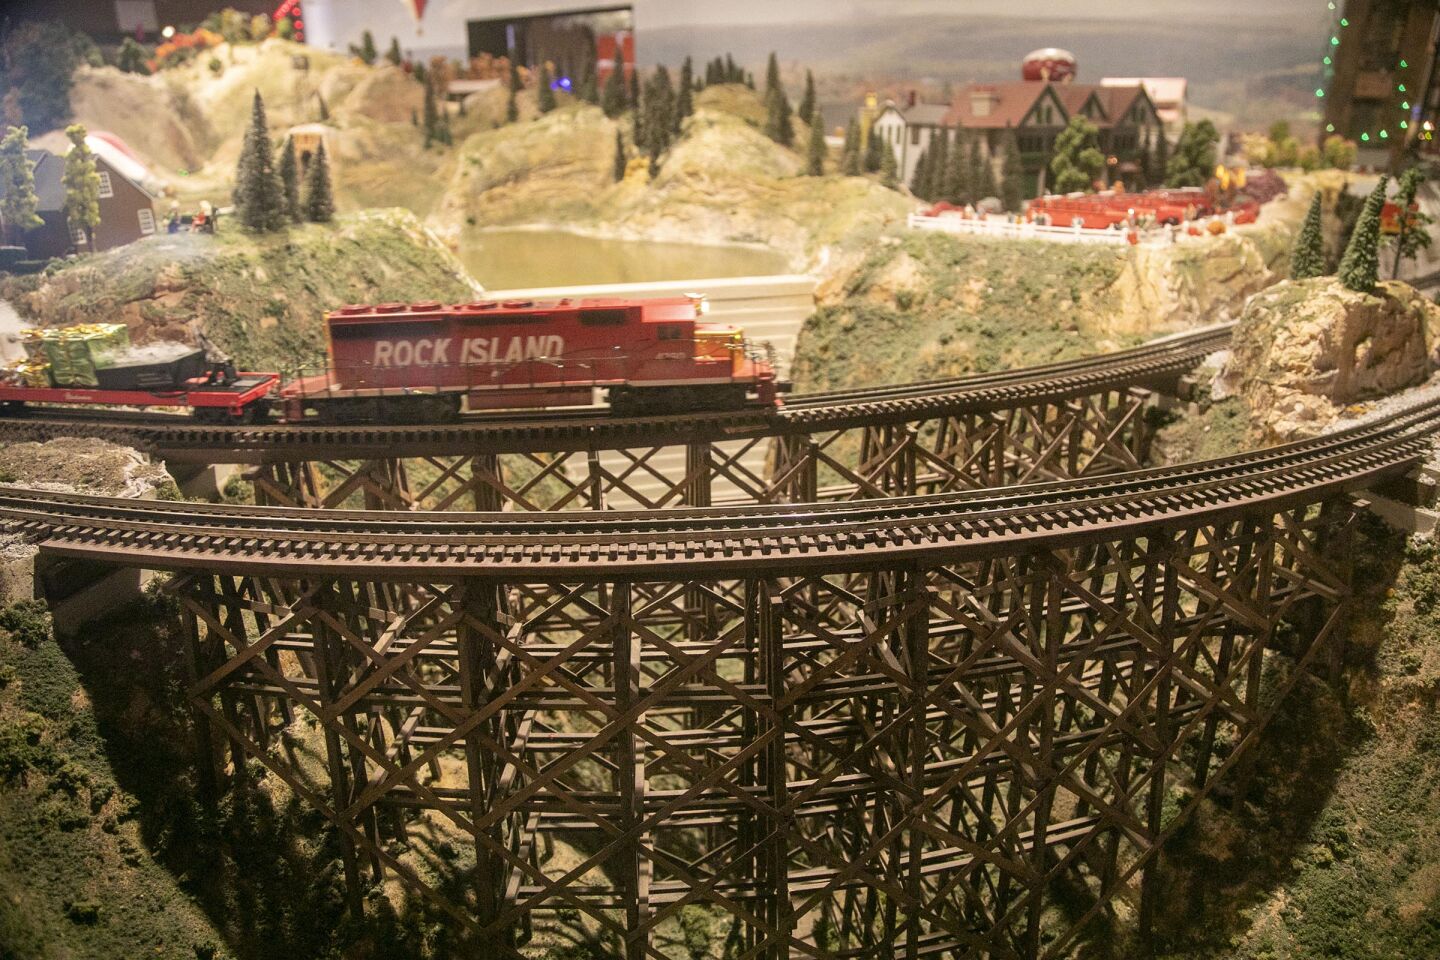 David Lizerbram and his wife Mana Monzavi took over the Old Town Model Railroad Depot, which was in danger of closing. The extensive train layout and its detailed and sometimes humorous dioramas was photographed on Friday, Dec. 13, 2019, at its Old Town, San Diego location. This curved trestle bridge model was built by an engineer when the diorama was created five years ago.